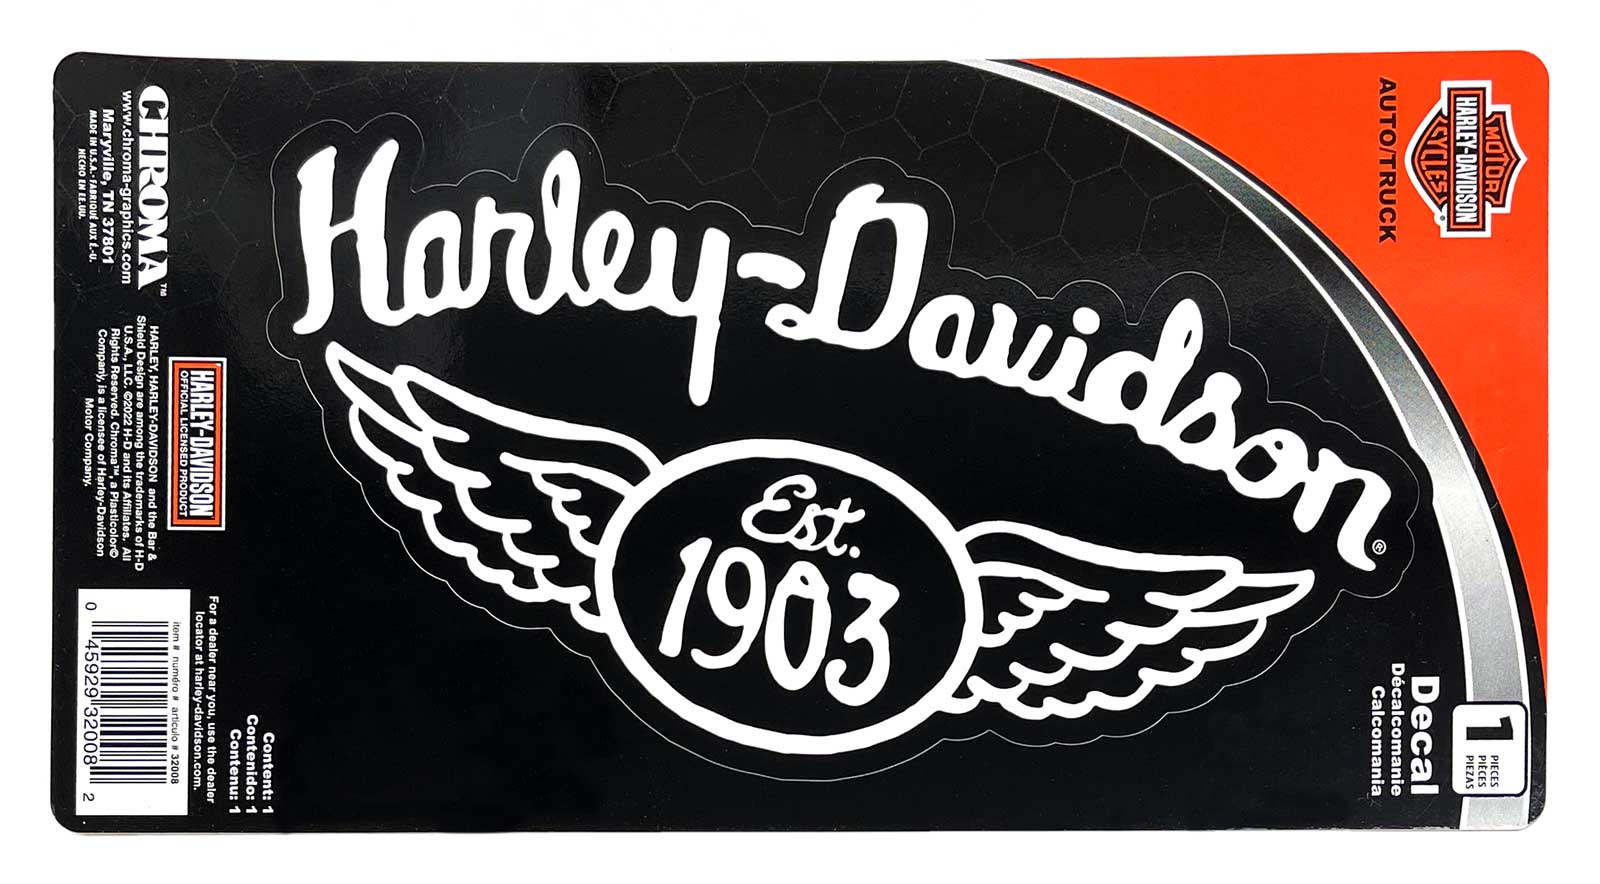 Harley Davidson Decals for Customizing Your Ride